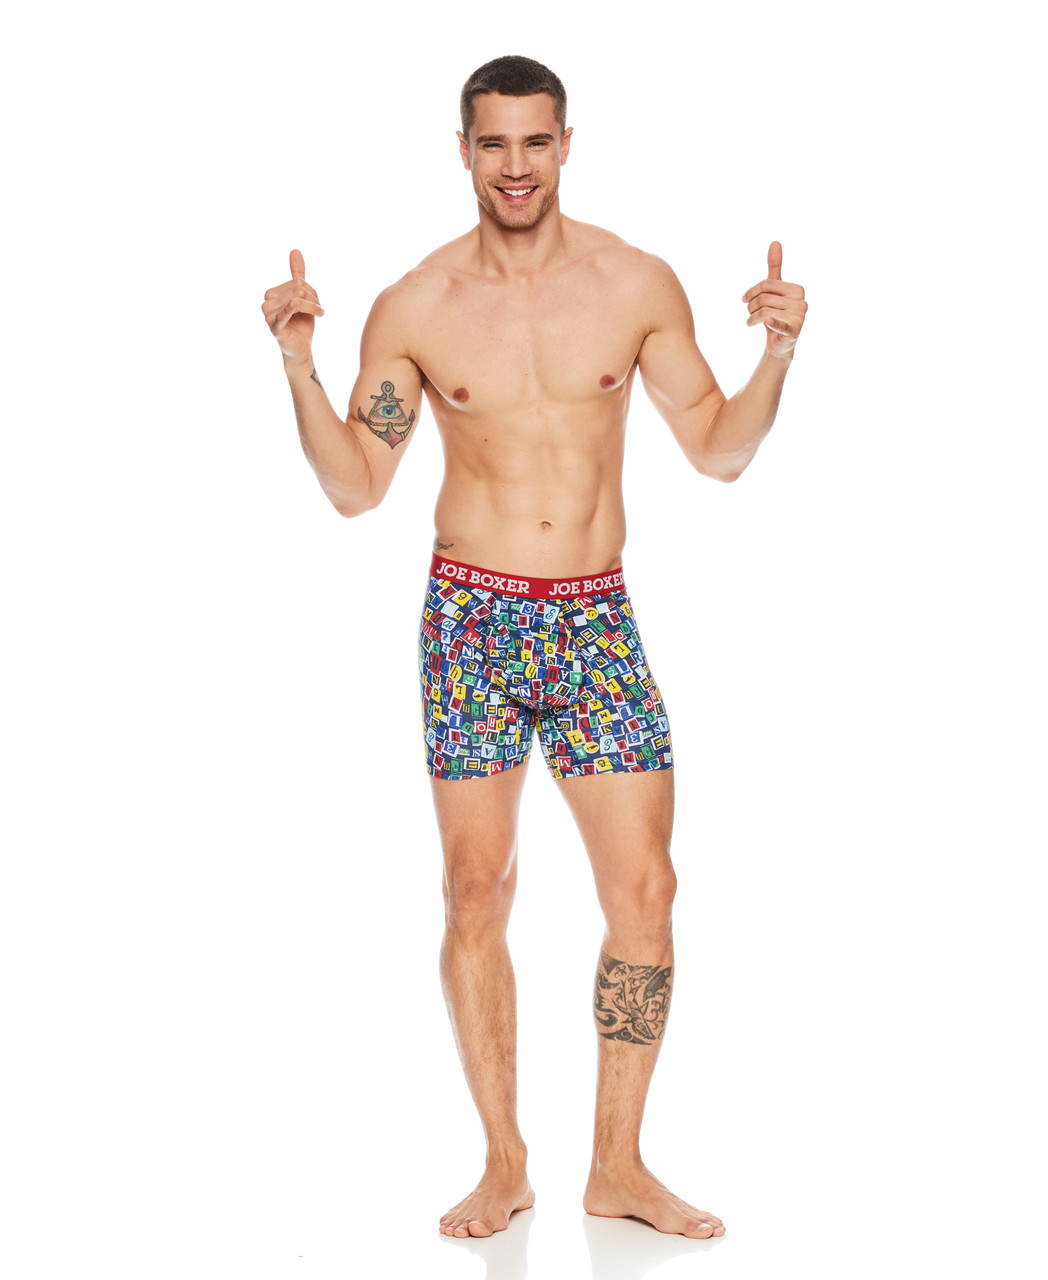 New Collection Underwear  Buy The Latest Funky Trunks Comfy